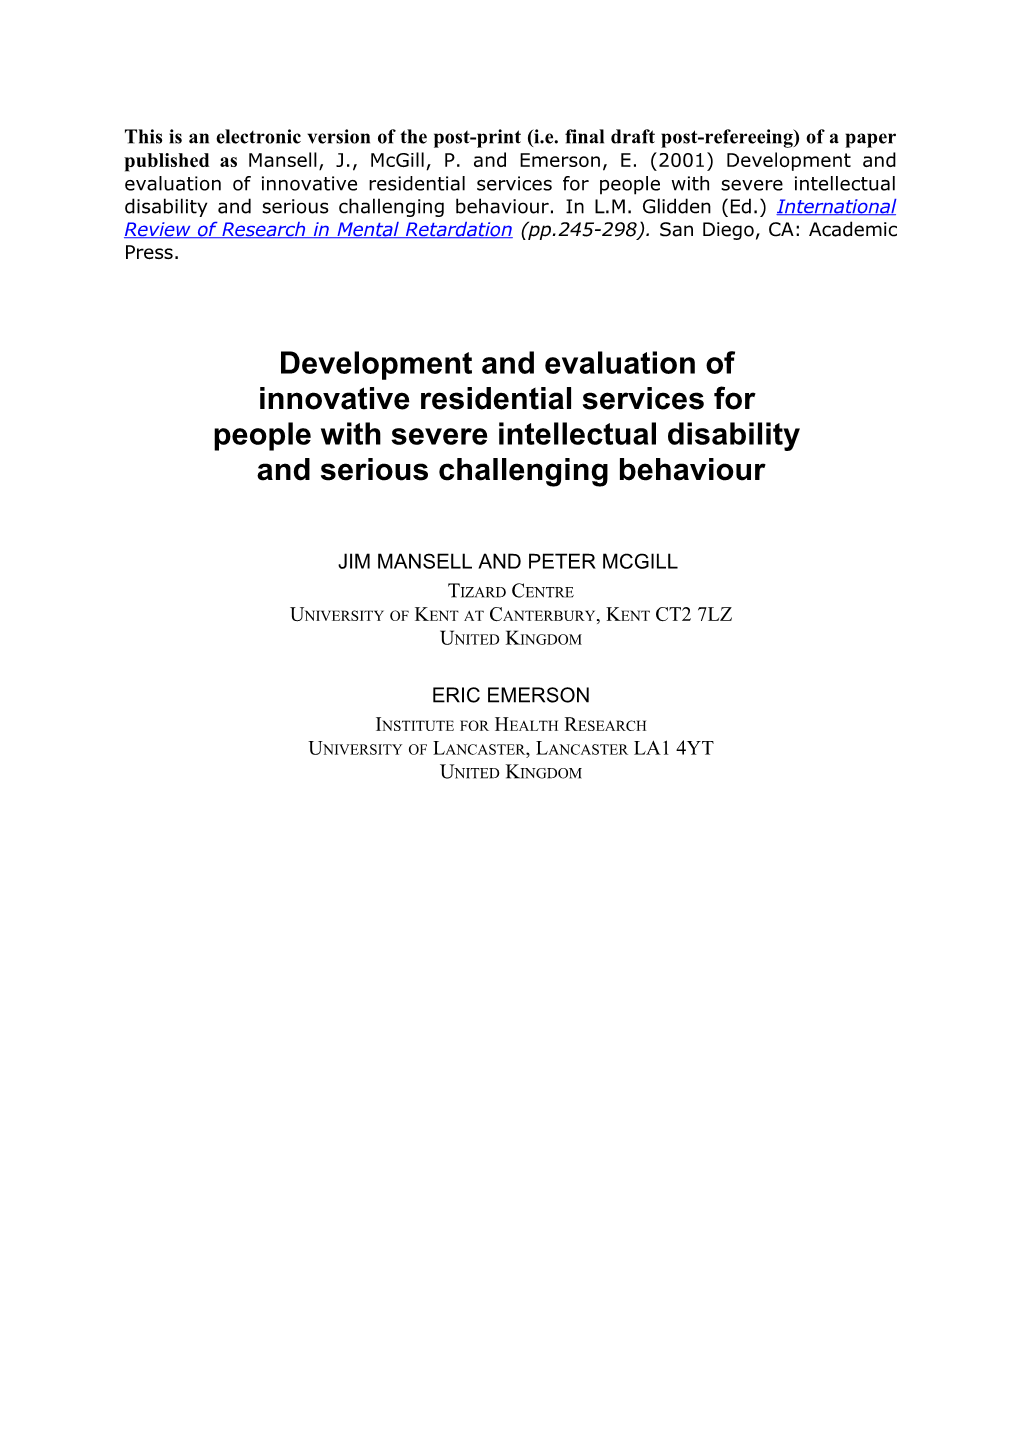 Development and Evaluation of Innovative Residential Services for People with Severe